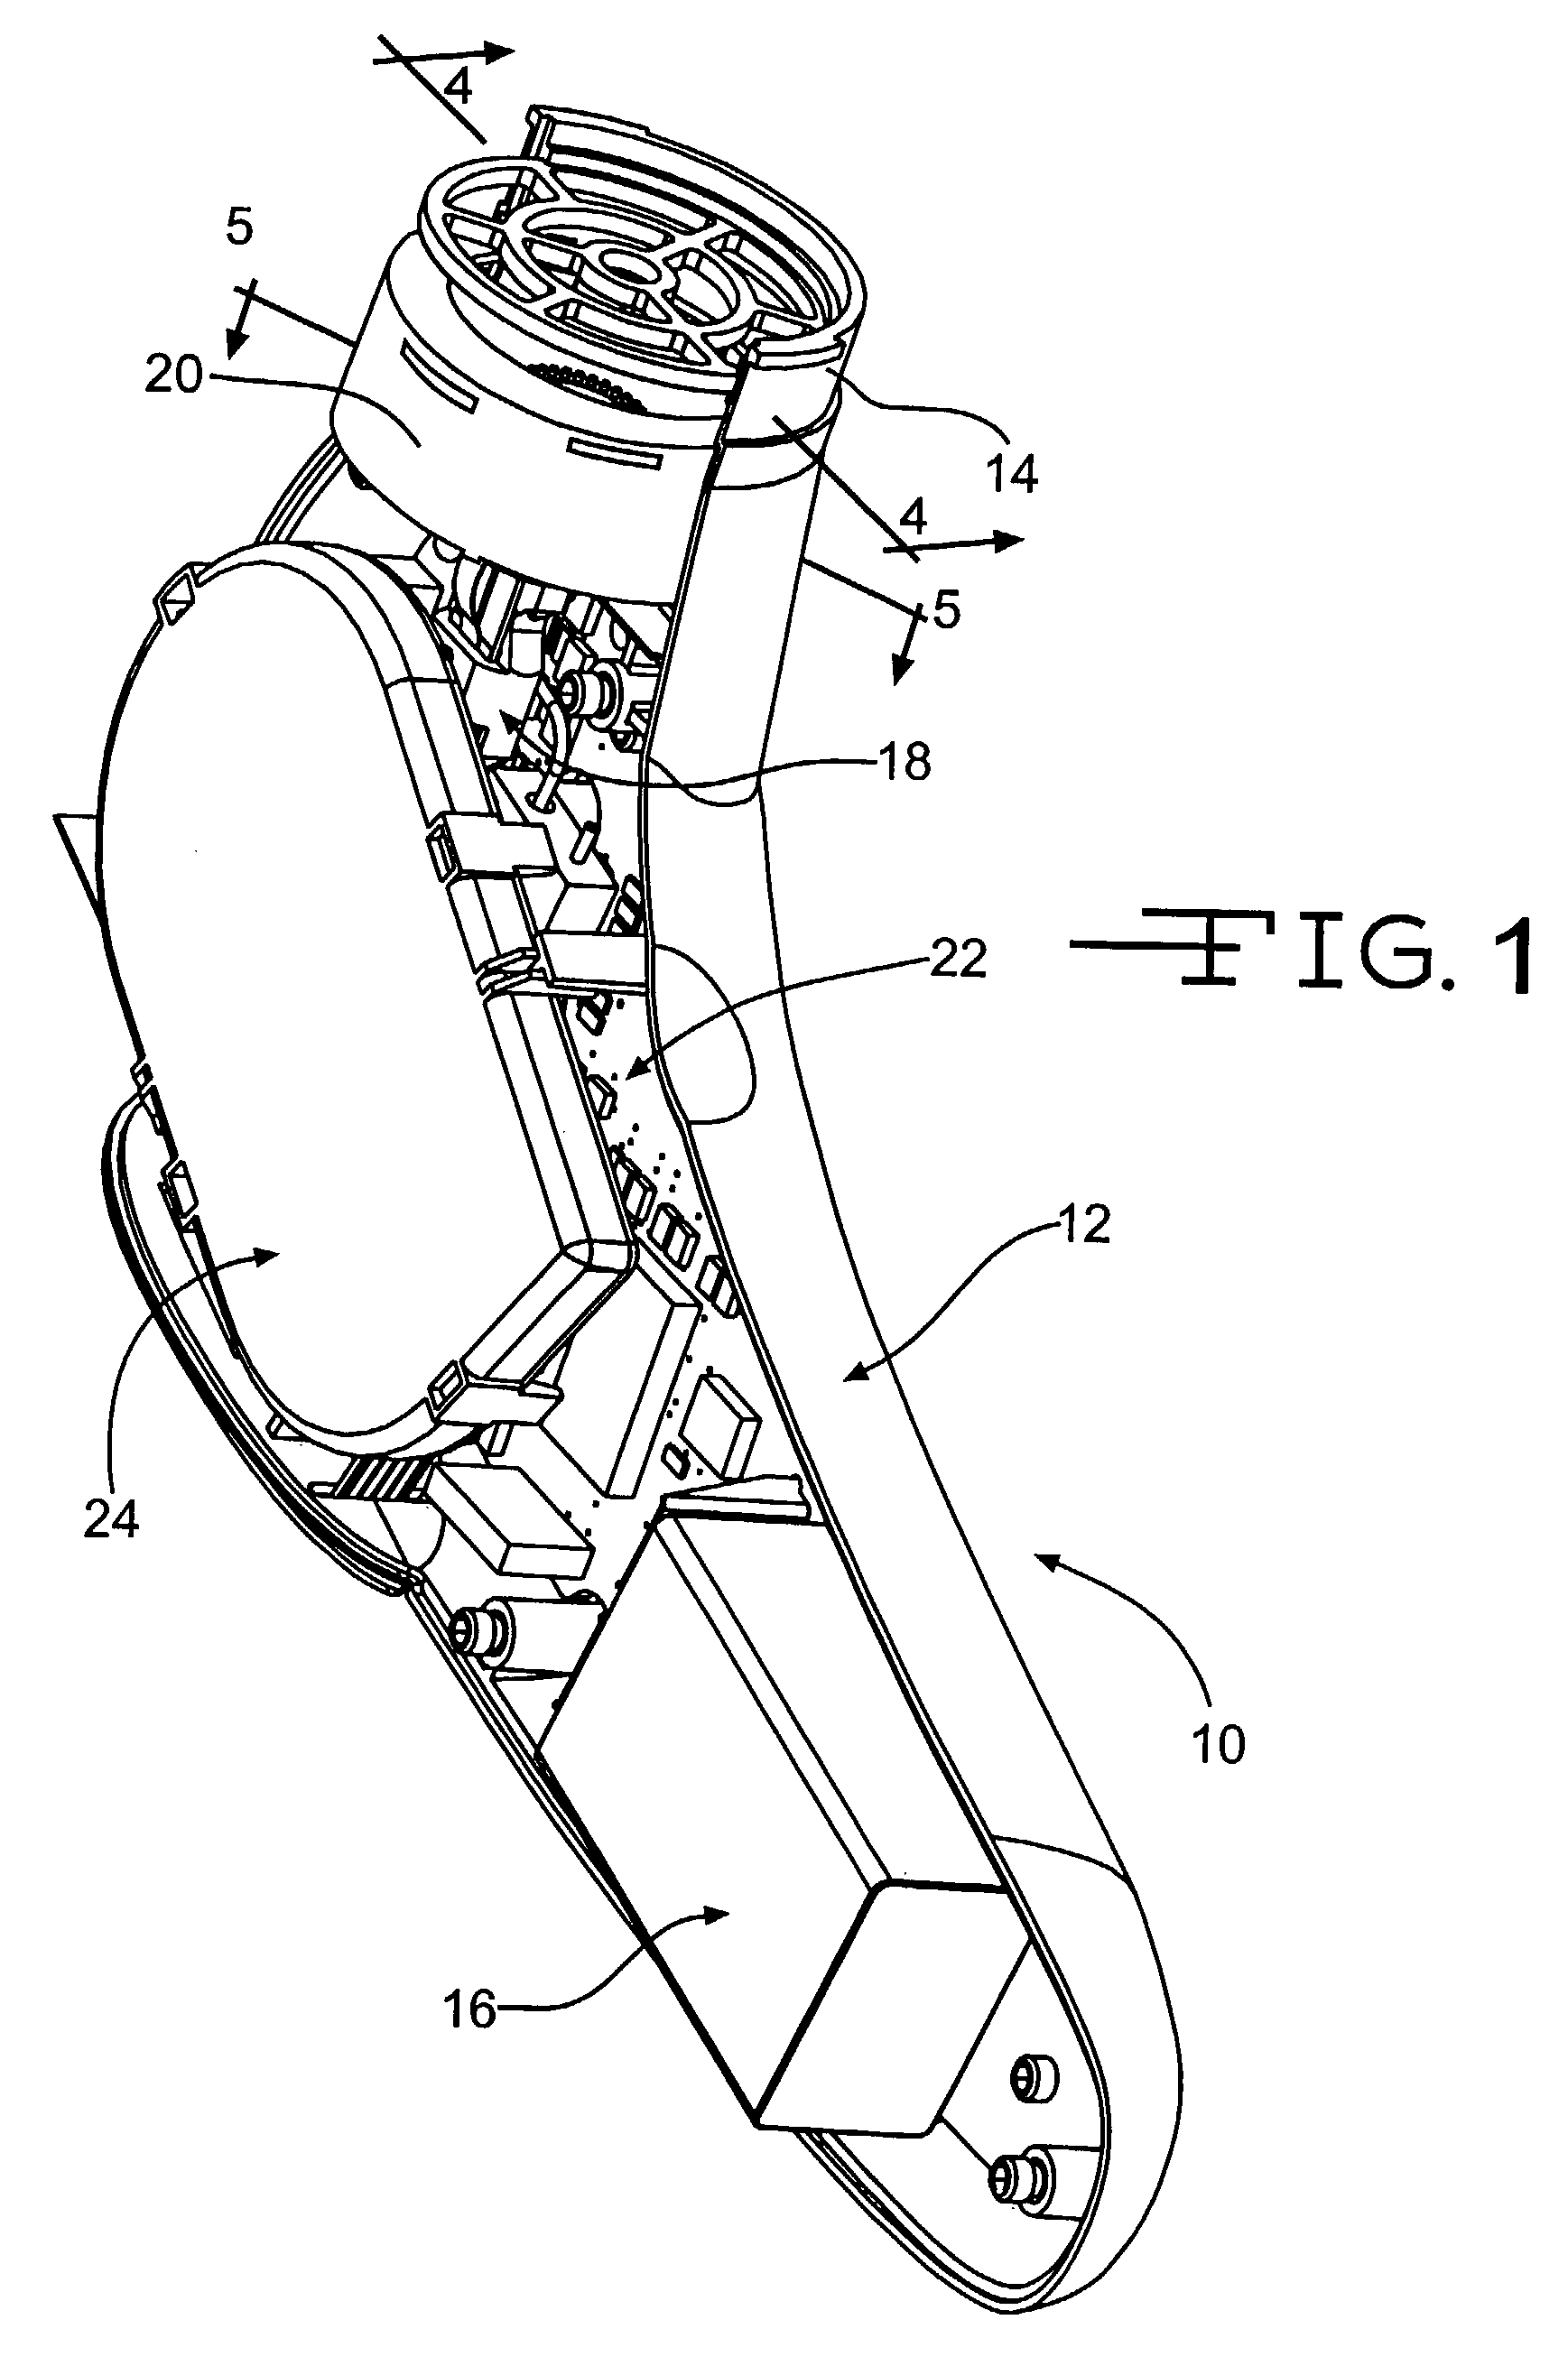 Nozzle for handheld pulmonary aerosol delivery device